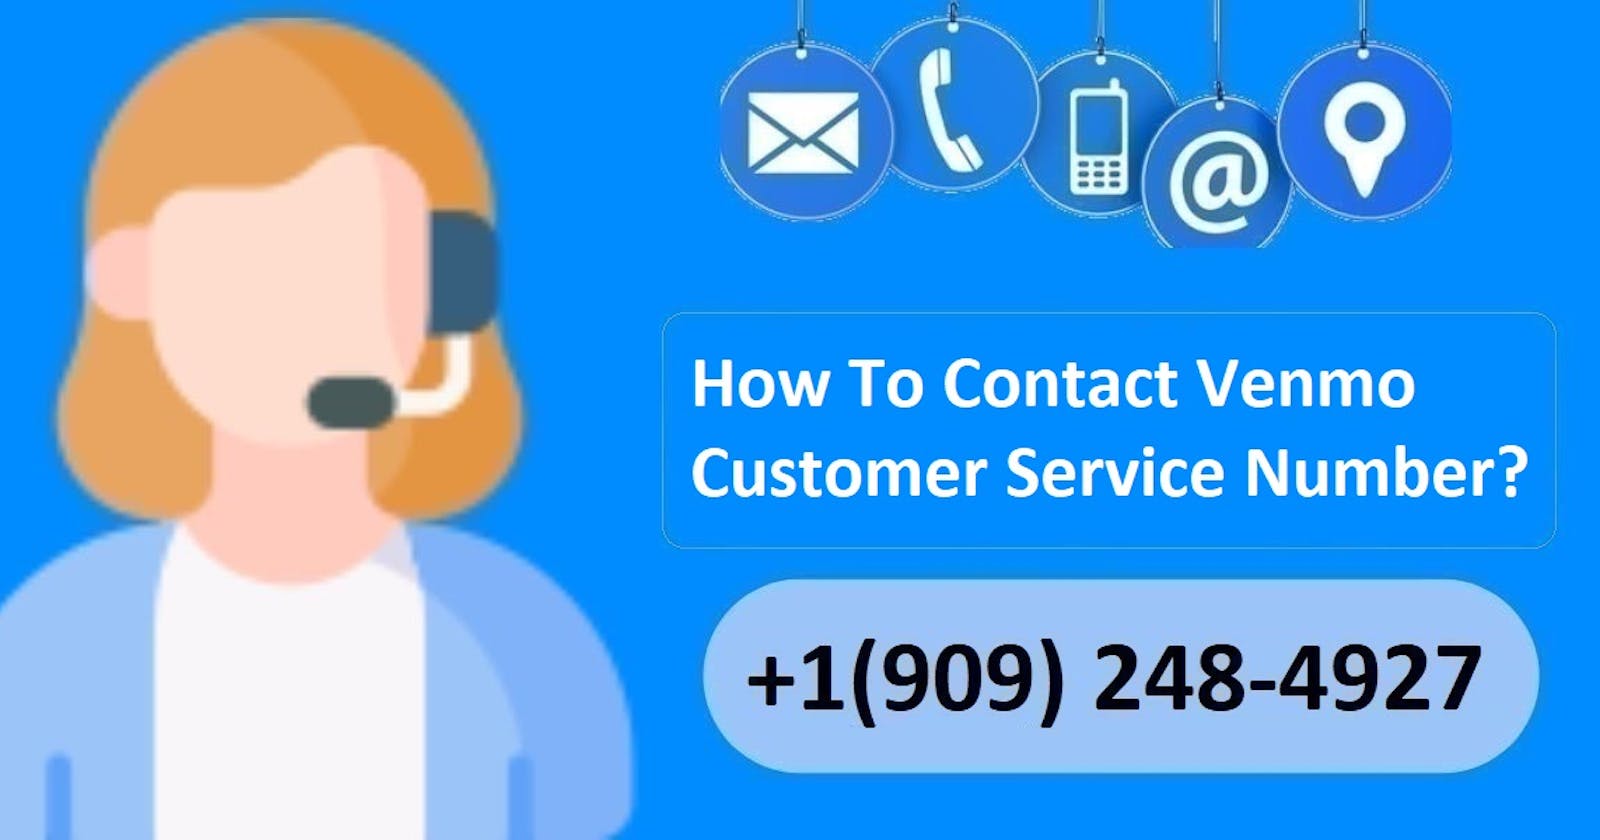 How To Contact Venmo Customer Service Number?